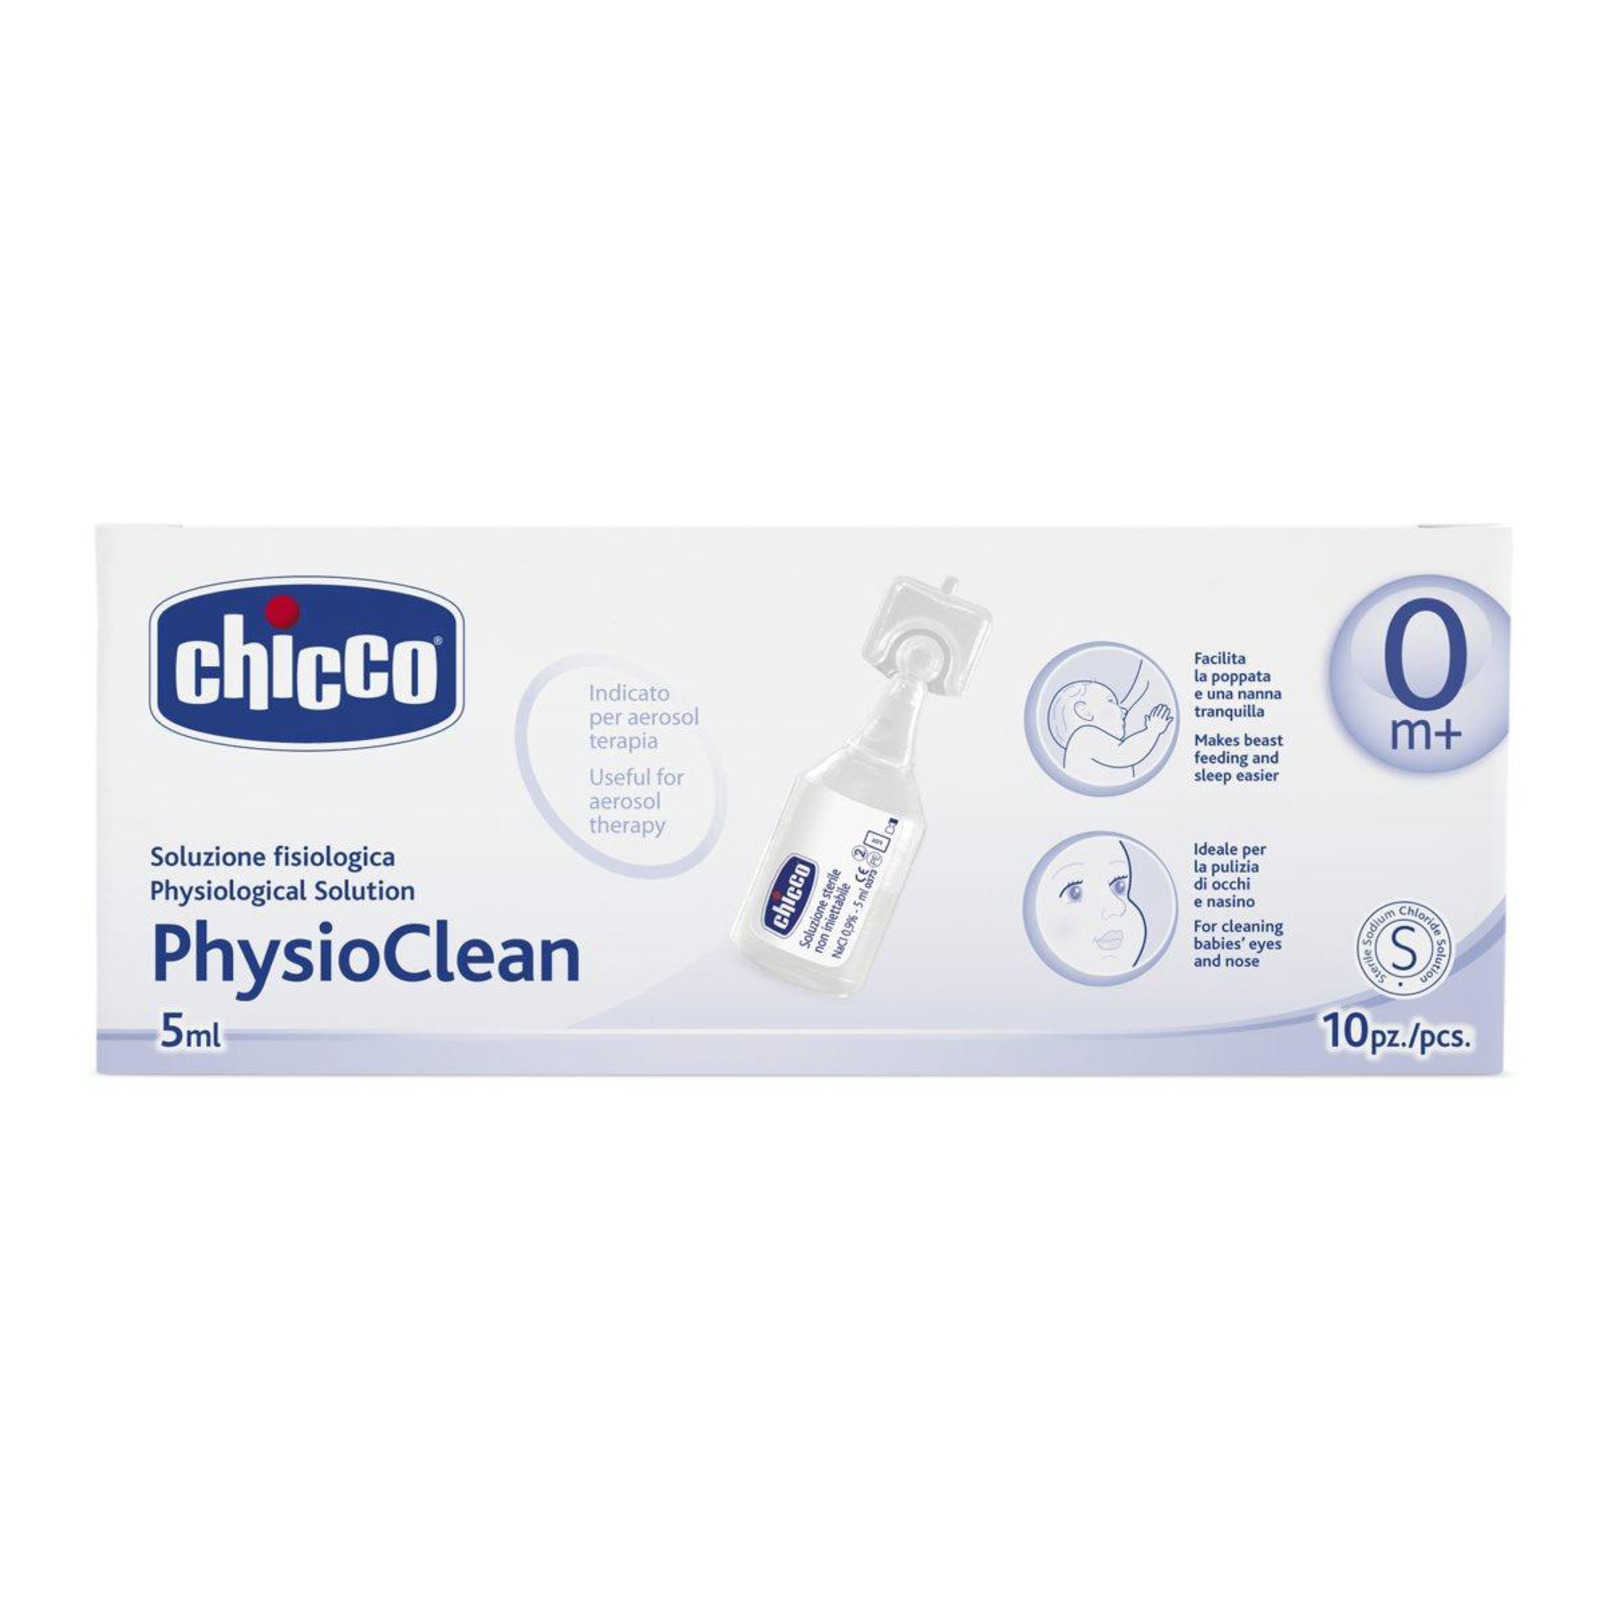 Chicco - PhysioClean - Fisiologica Sterile - 10 flaconcini